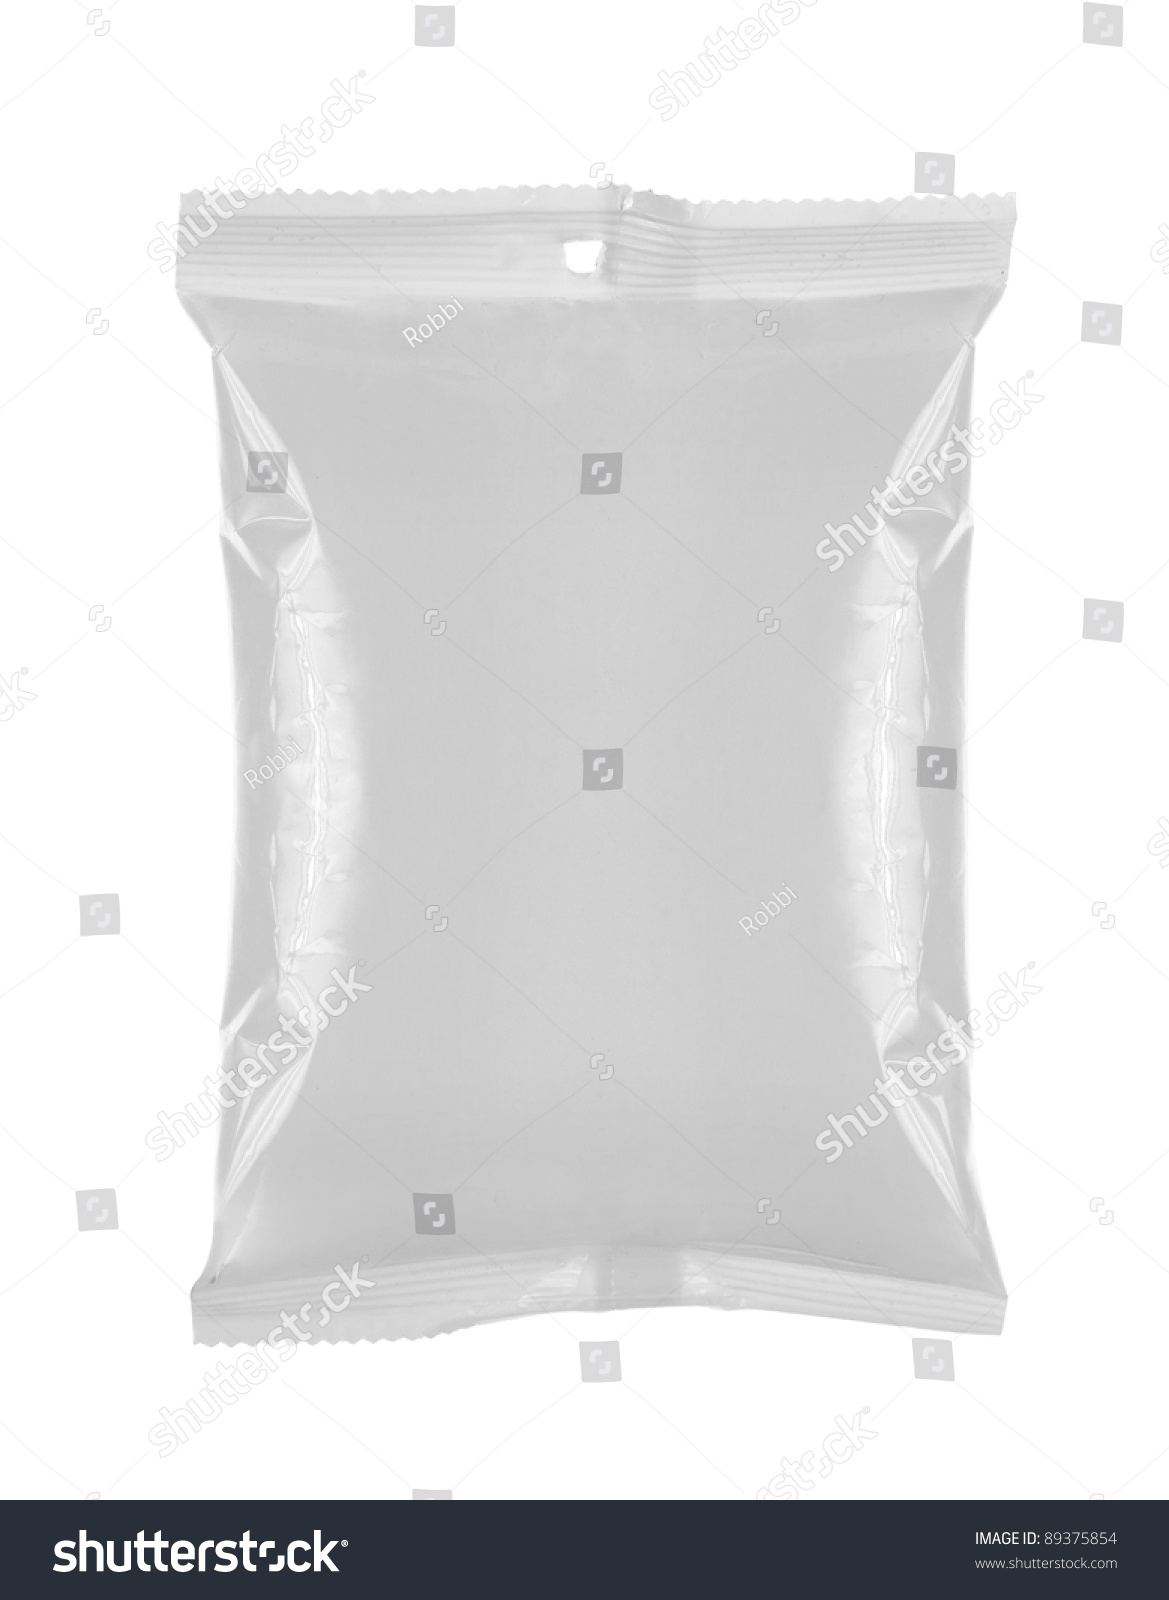 plastic bag snack packaging. for another blank packaging visit my gallery #89375854